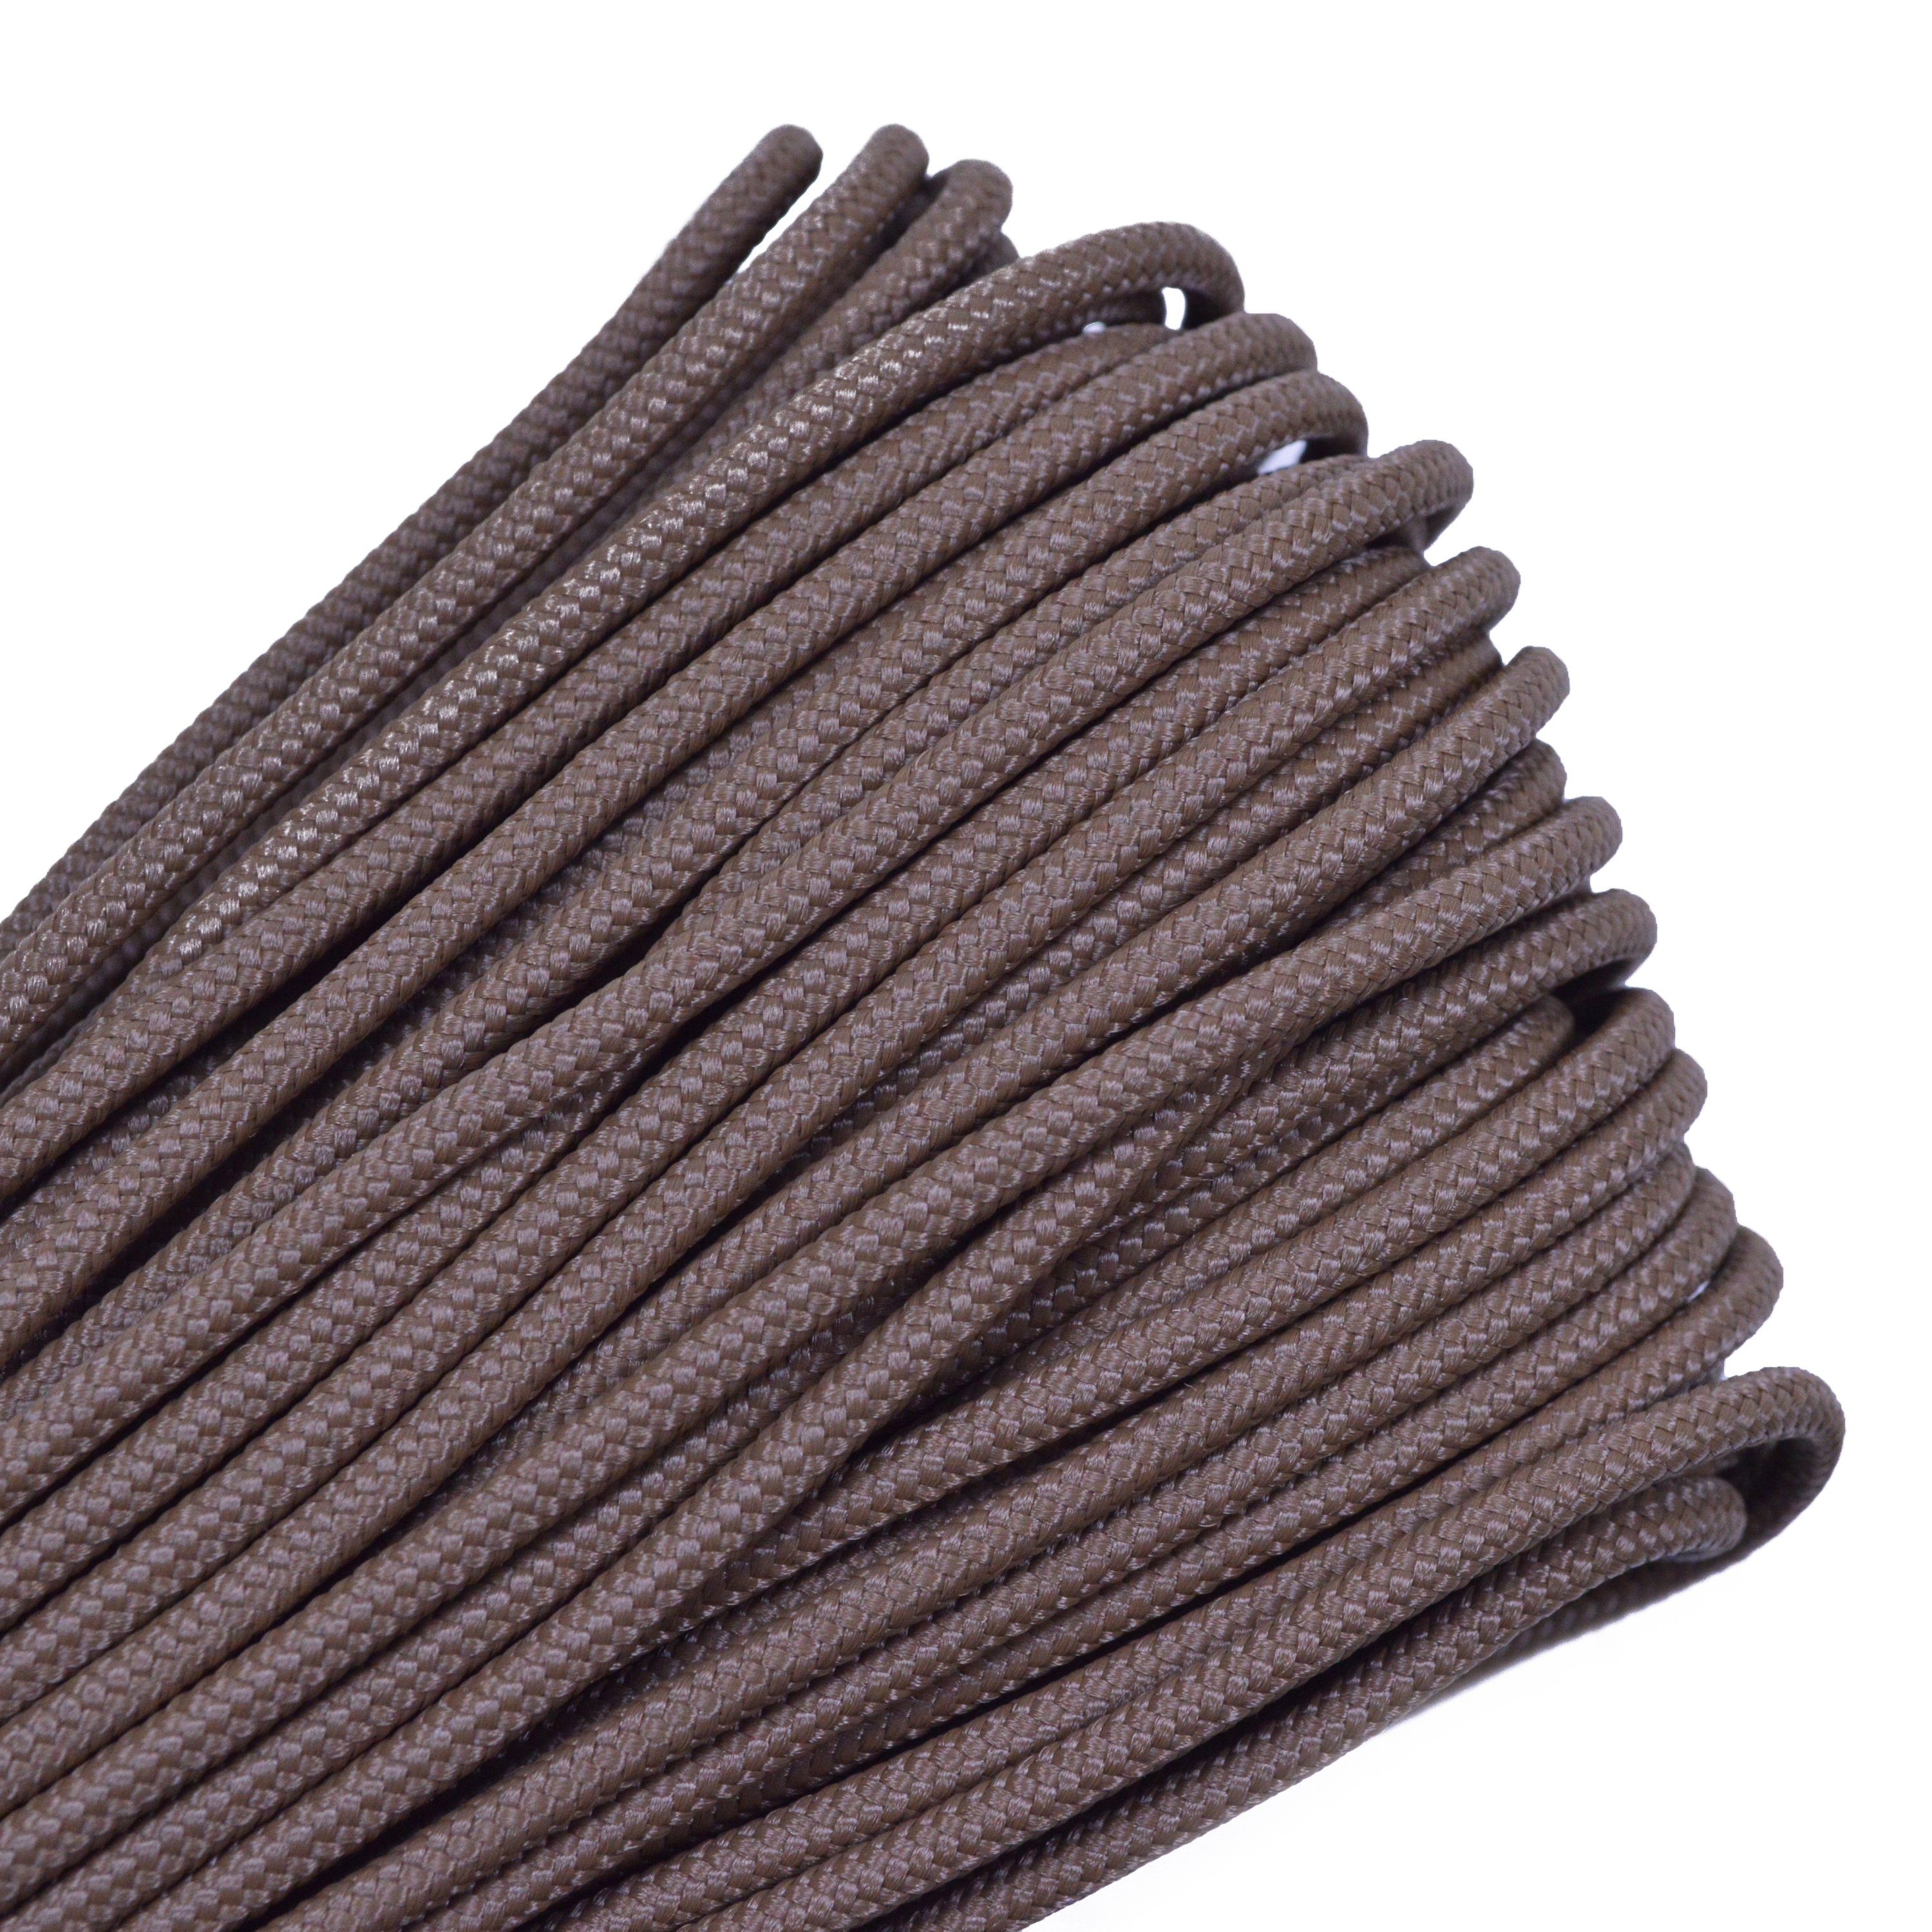 Coyote Brown 275 Cord 5 Strand Paracord - 100 Feet